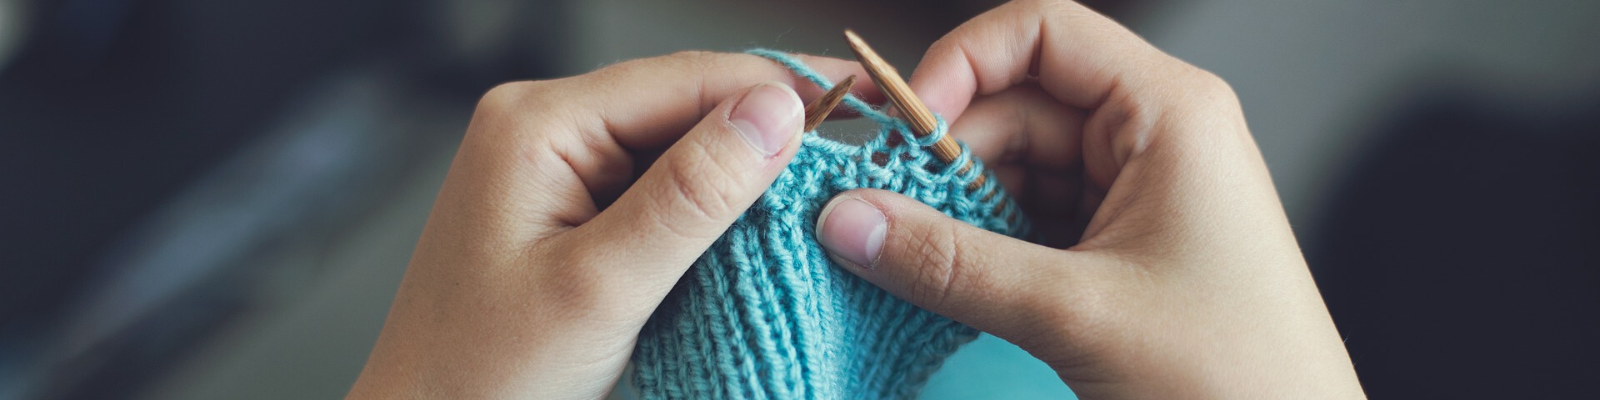 Picture of hands knitting